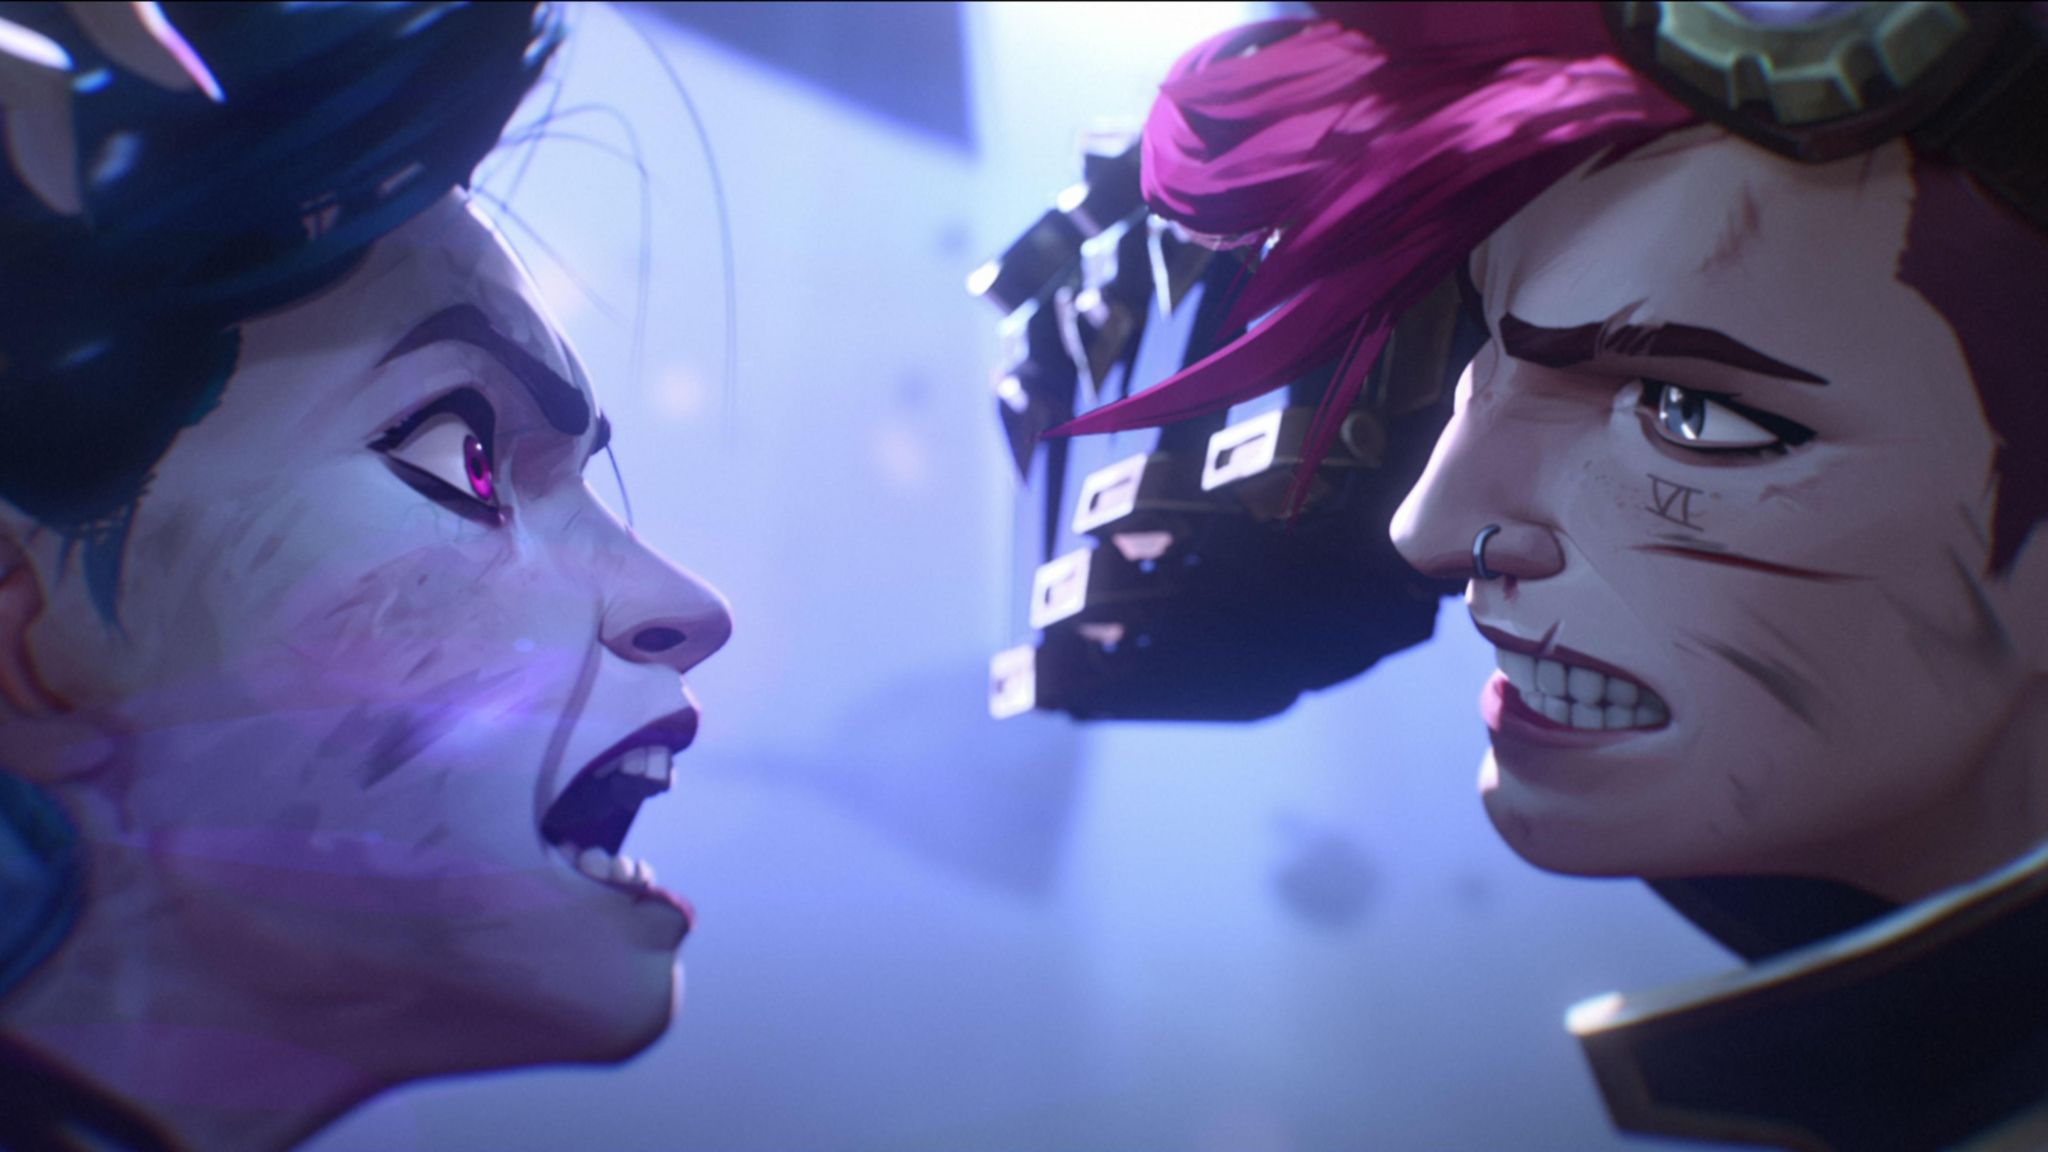 Still from animated show Arcane shows two characters about to collide, their eyes locked on each other. On the left a blue-haired character has her mouth open, screaming, and her violet eyes blazing. On the opposite side of the shot a character with pink hair, a nose ring and roman numerals VI tattooed on her cheek is holding up a gauntlet-clad fist about to strike.